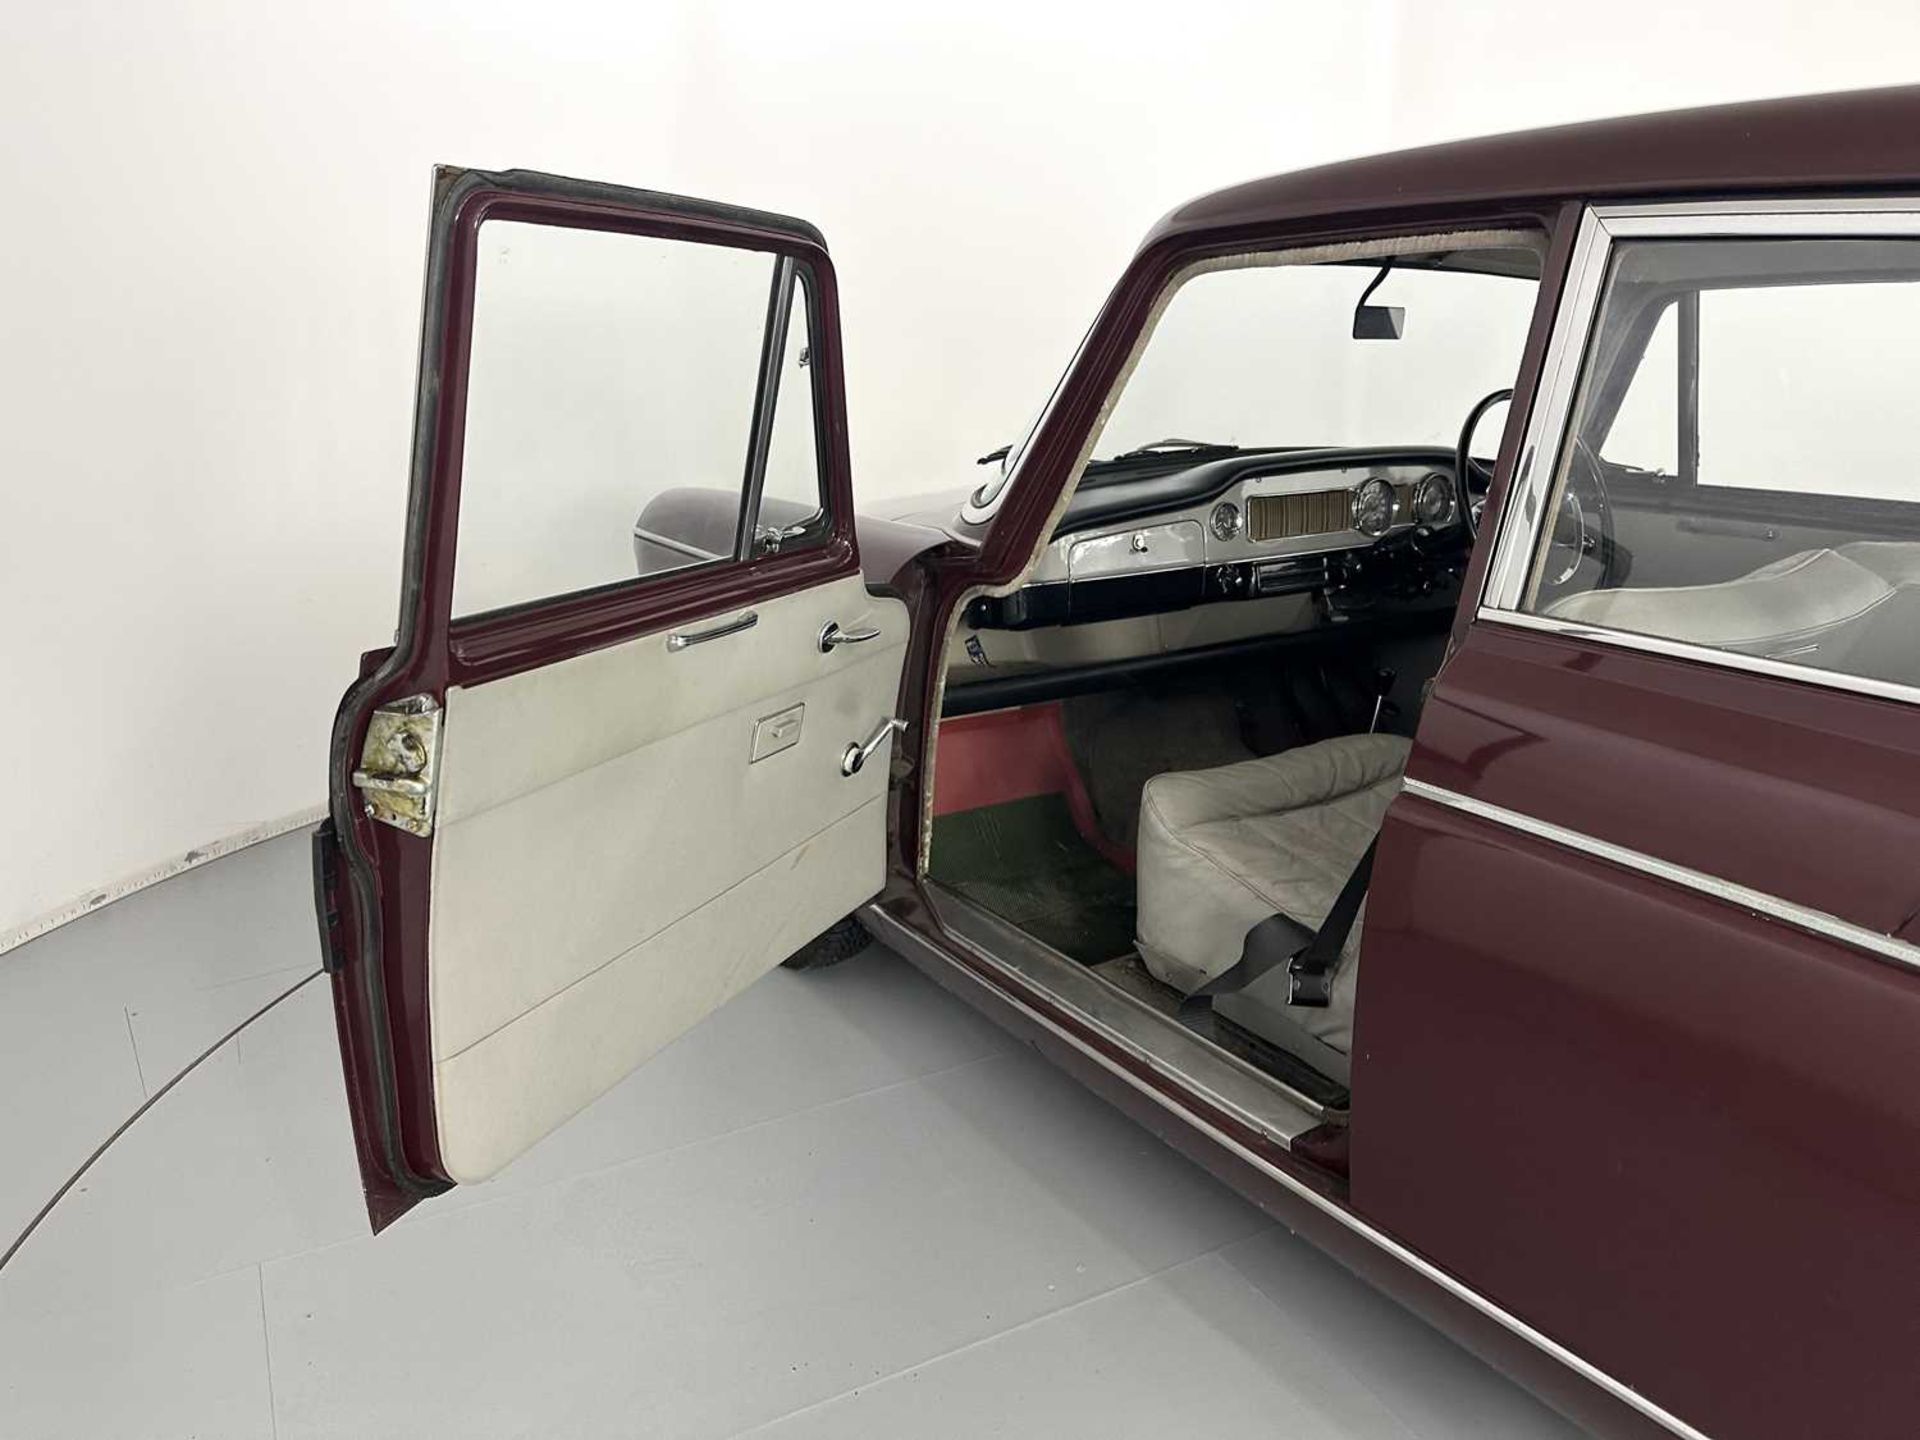 1963 Morris Oxford - NO RESERVE Former long term museum exhibit - Image 26 of 34